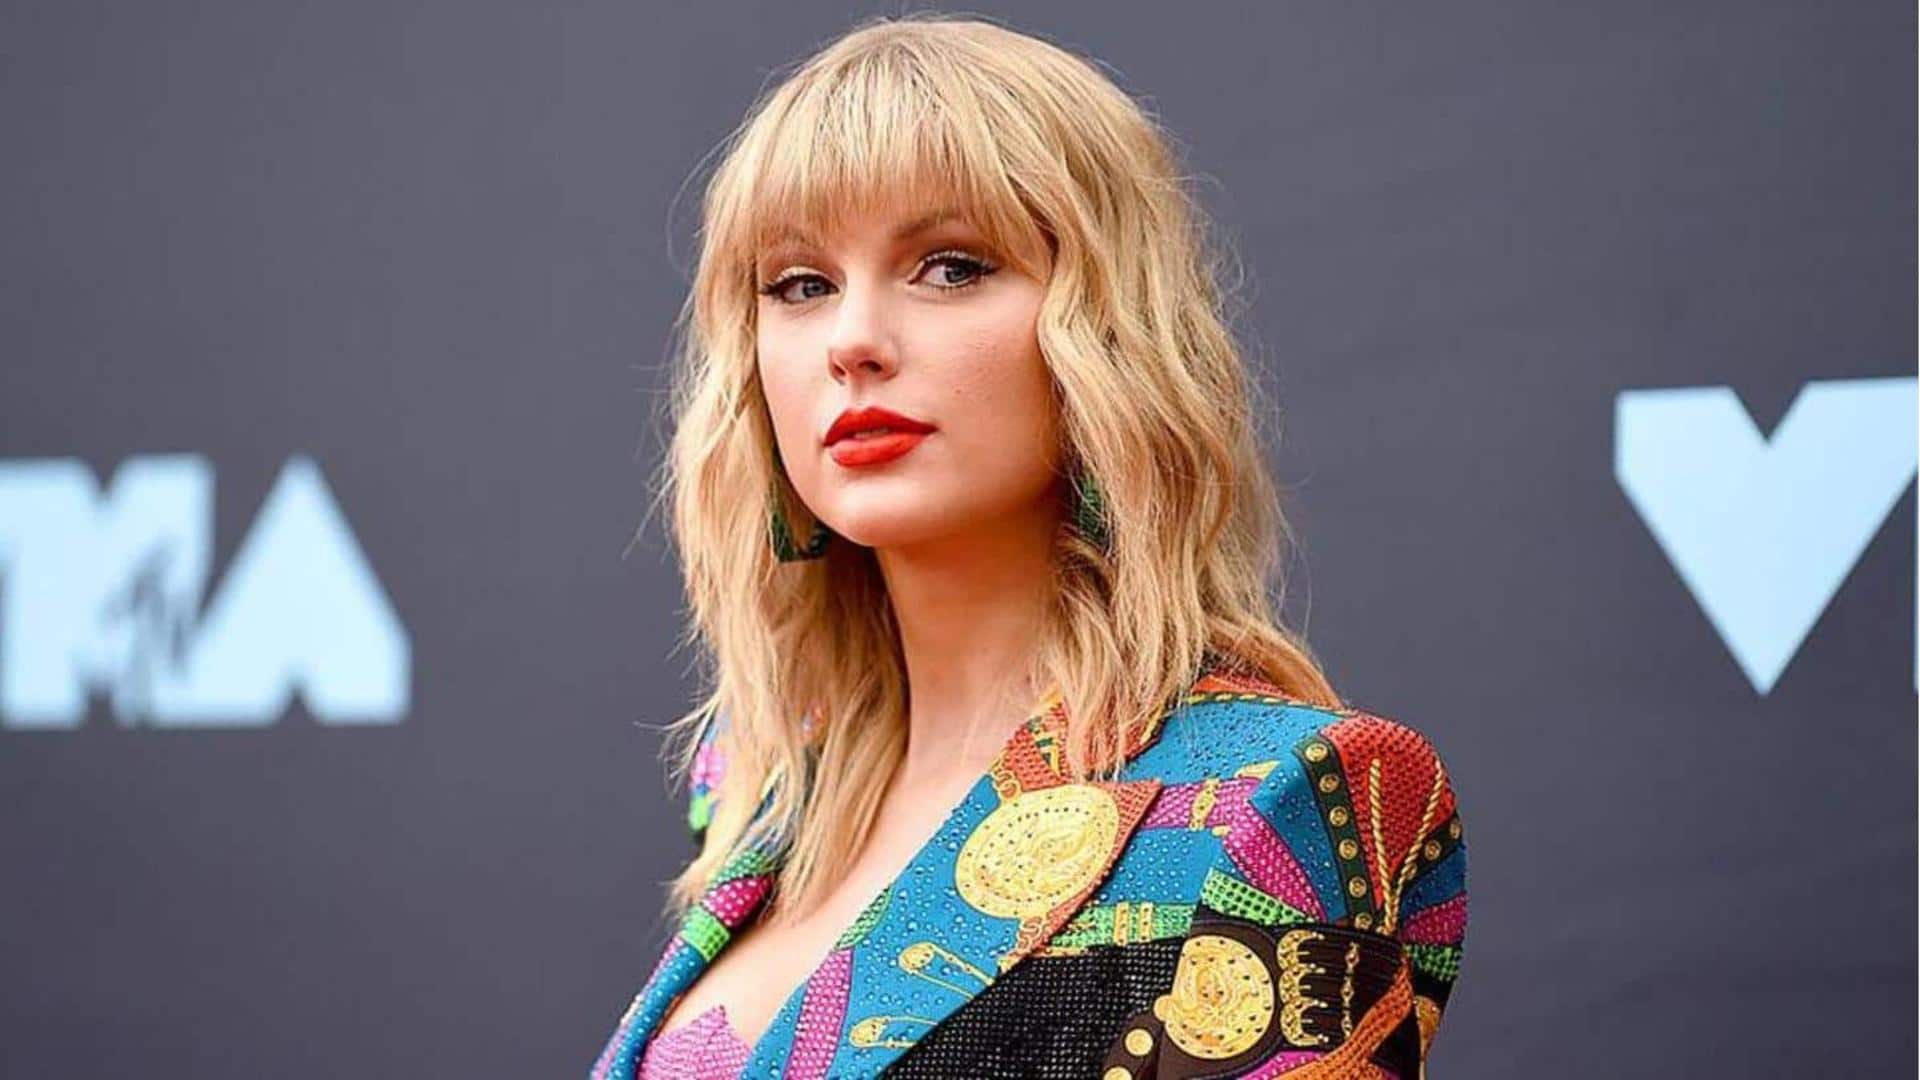 Looking at Taylor Swift's MTV EMA journey over the years